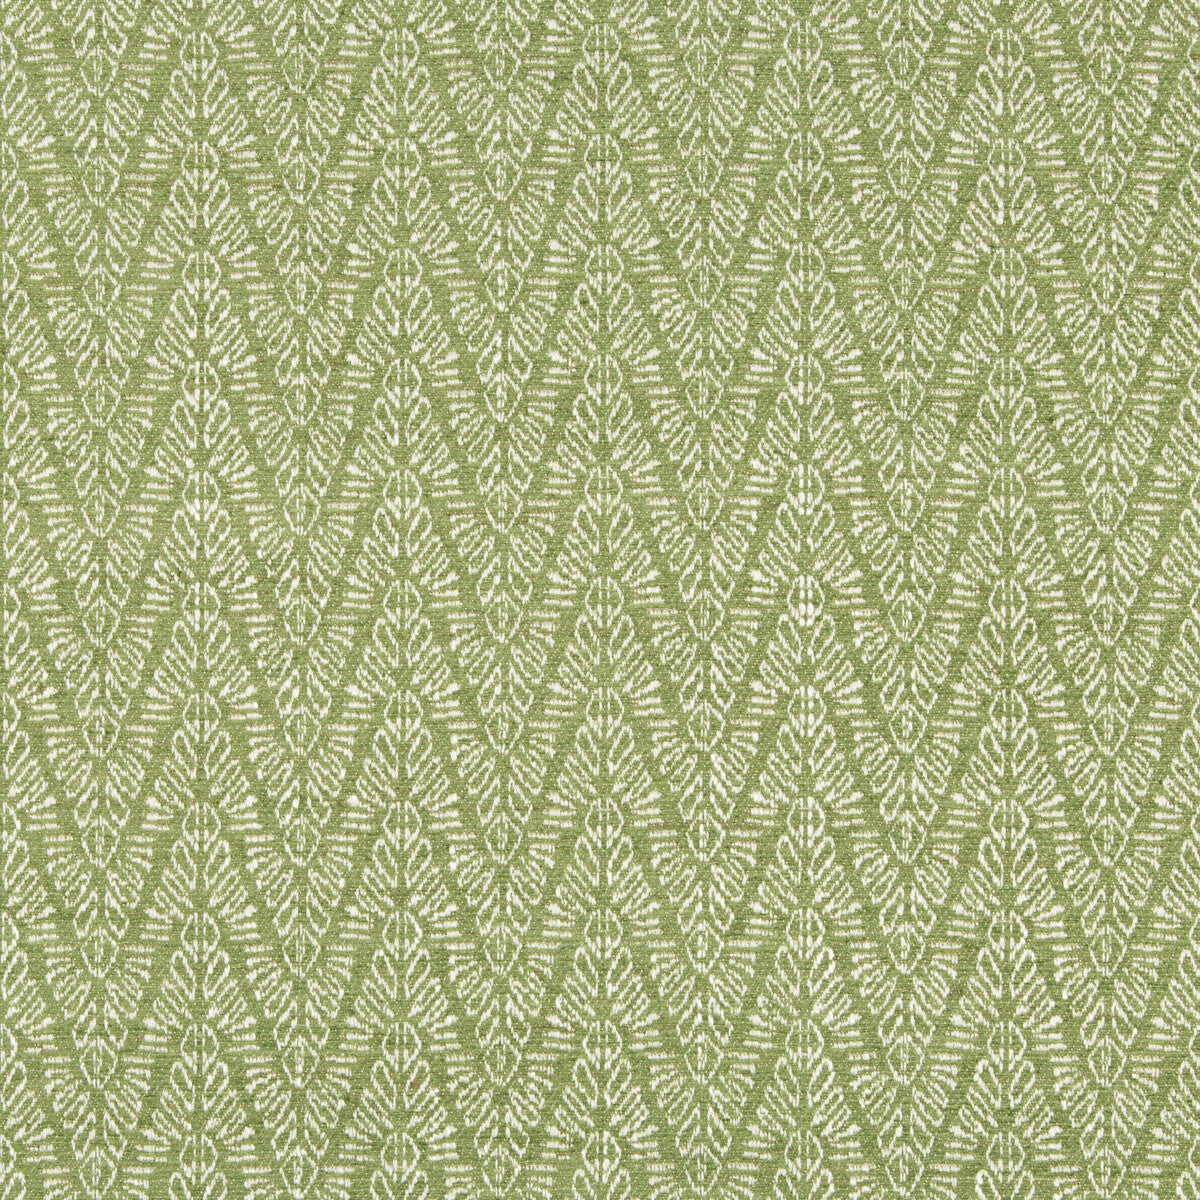 Topaz Weave fabric in meadow color - pattern GWF-3750.3.0 - by Lee Jofa Modern in the Gems collection